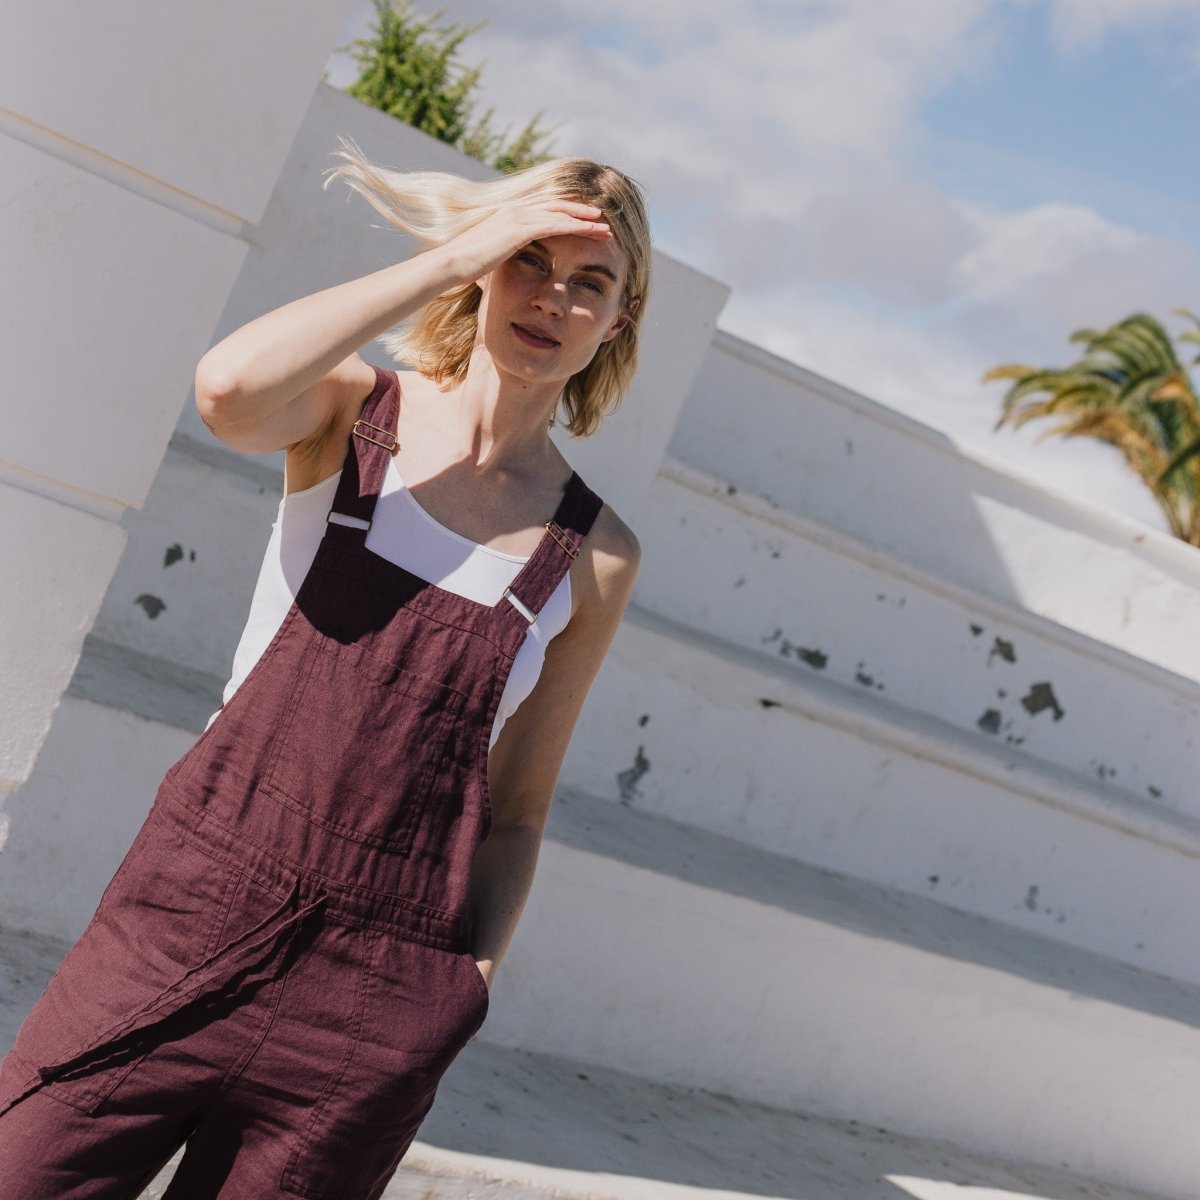 Linen dungaree dress - Hand painted dress NP | Cracow